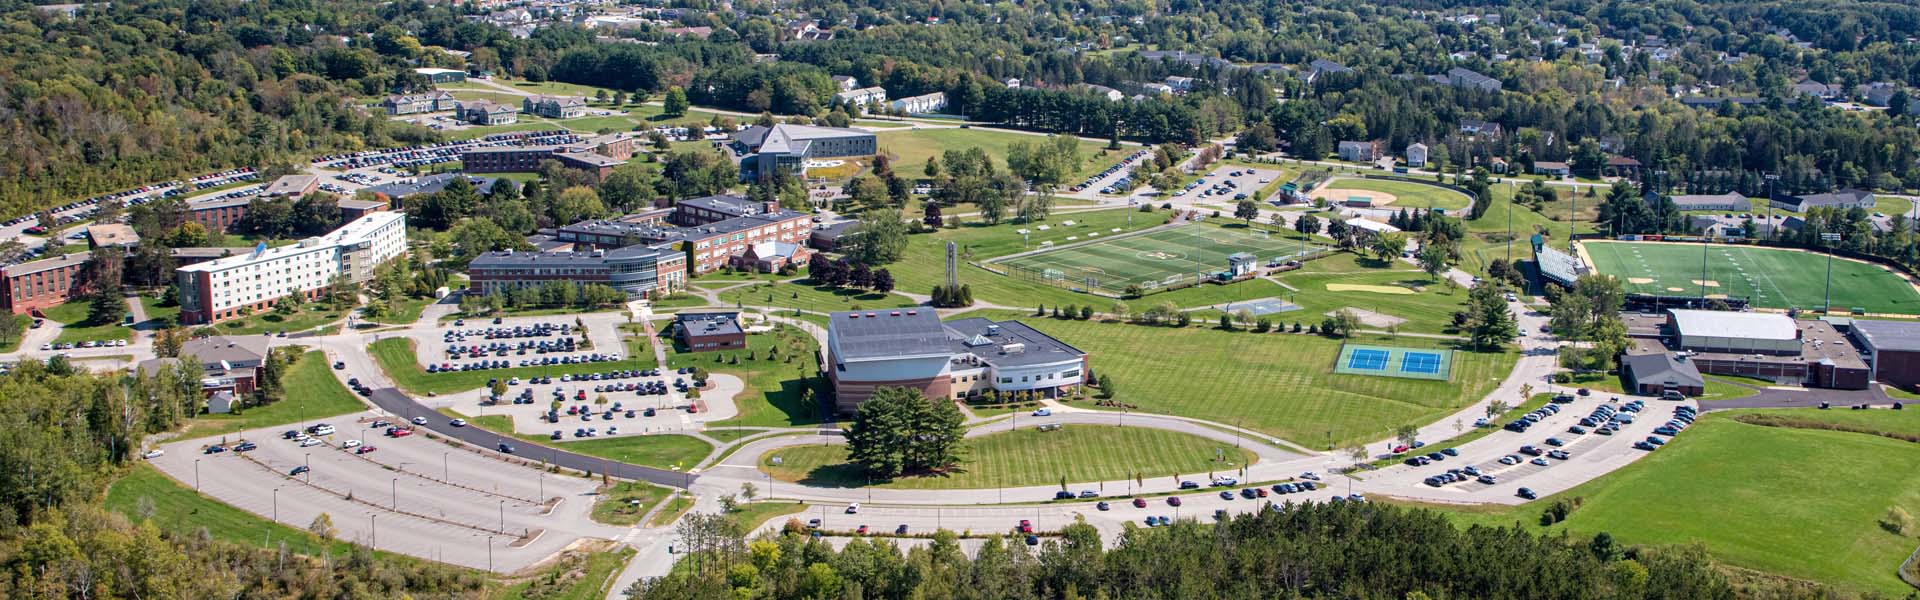 An aerial image of the campus of Husson University